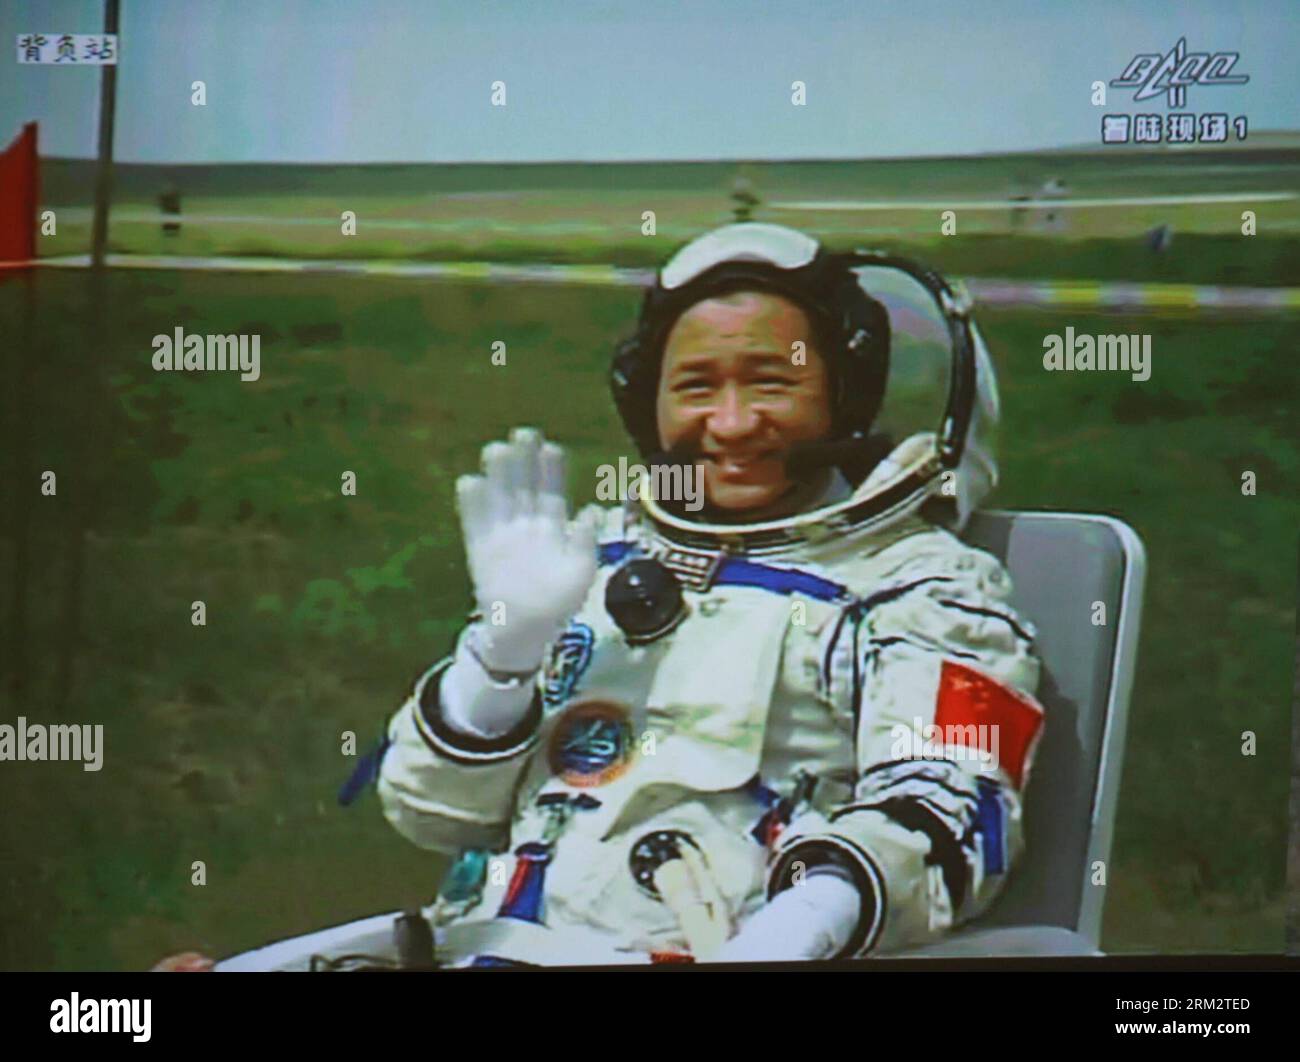 Bildnummer: 59902250  Datum: 26.06.2013  Copyright: imago/Xinhua (130626) -- BEIJING, June 26, 2013 (Xinhua) -- The screen at the Beijing Aerospace Control Center shows astronaut Nie Haisheng waving after getting out of the re-entry capsule of China s Shenzhou-10 spacecraft following its landing in north China s Inner Mongolia Autonomous Region on June 26, 2013. Commander-in-chief of China s manned space program Zhang Youxia has announced that the Shenzhou-10 mission was successful after the three crewmembers landed safely and left the spacecraft s re-entry module Wednesday morning. (Xinhua/Wa Stock Photo